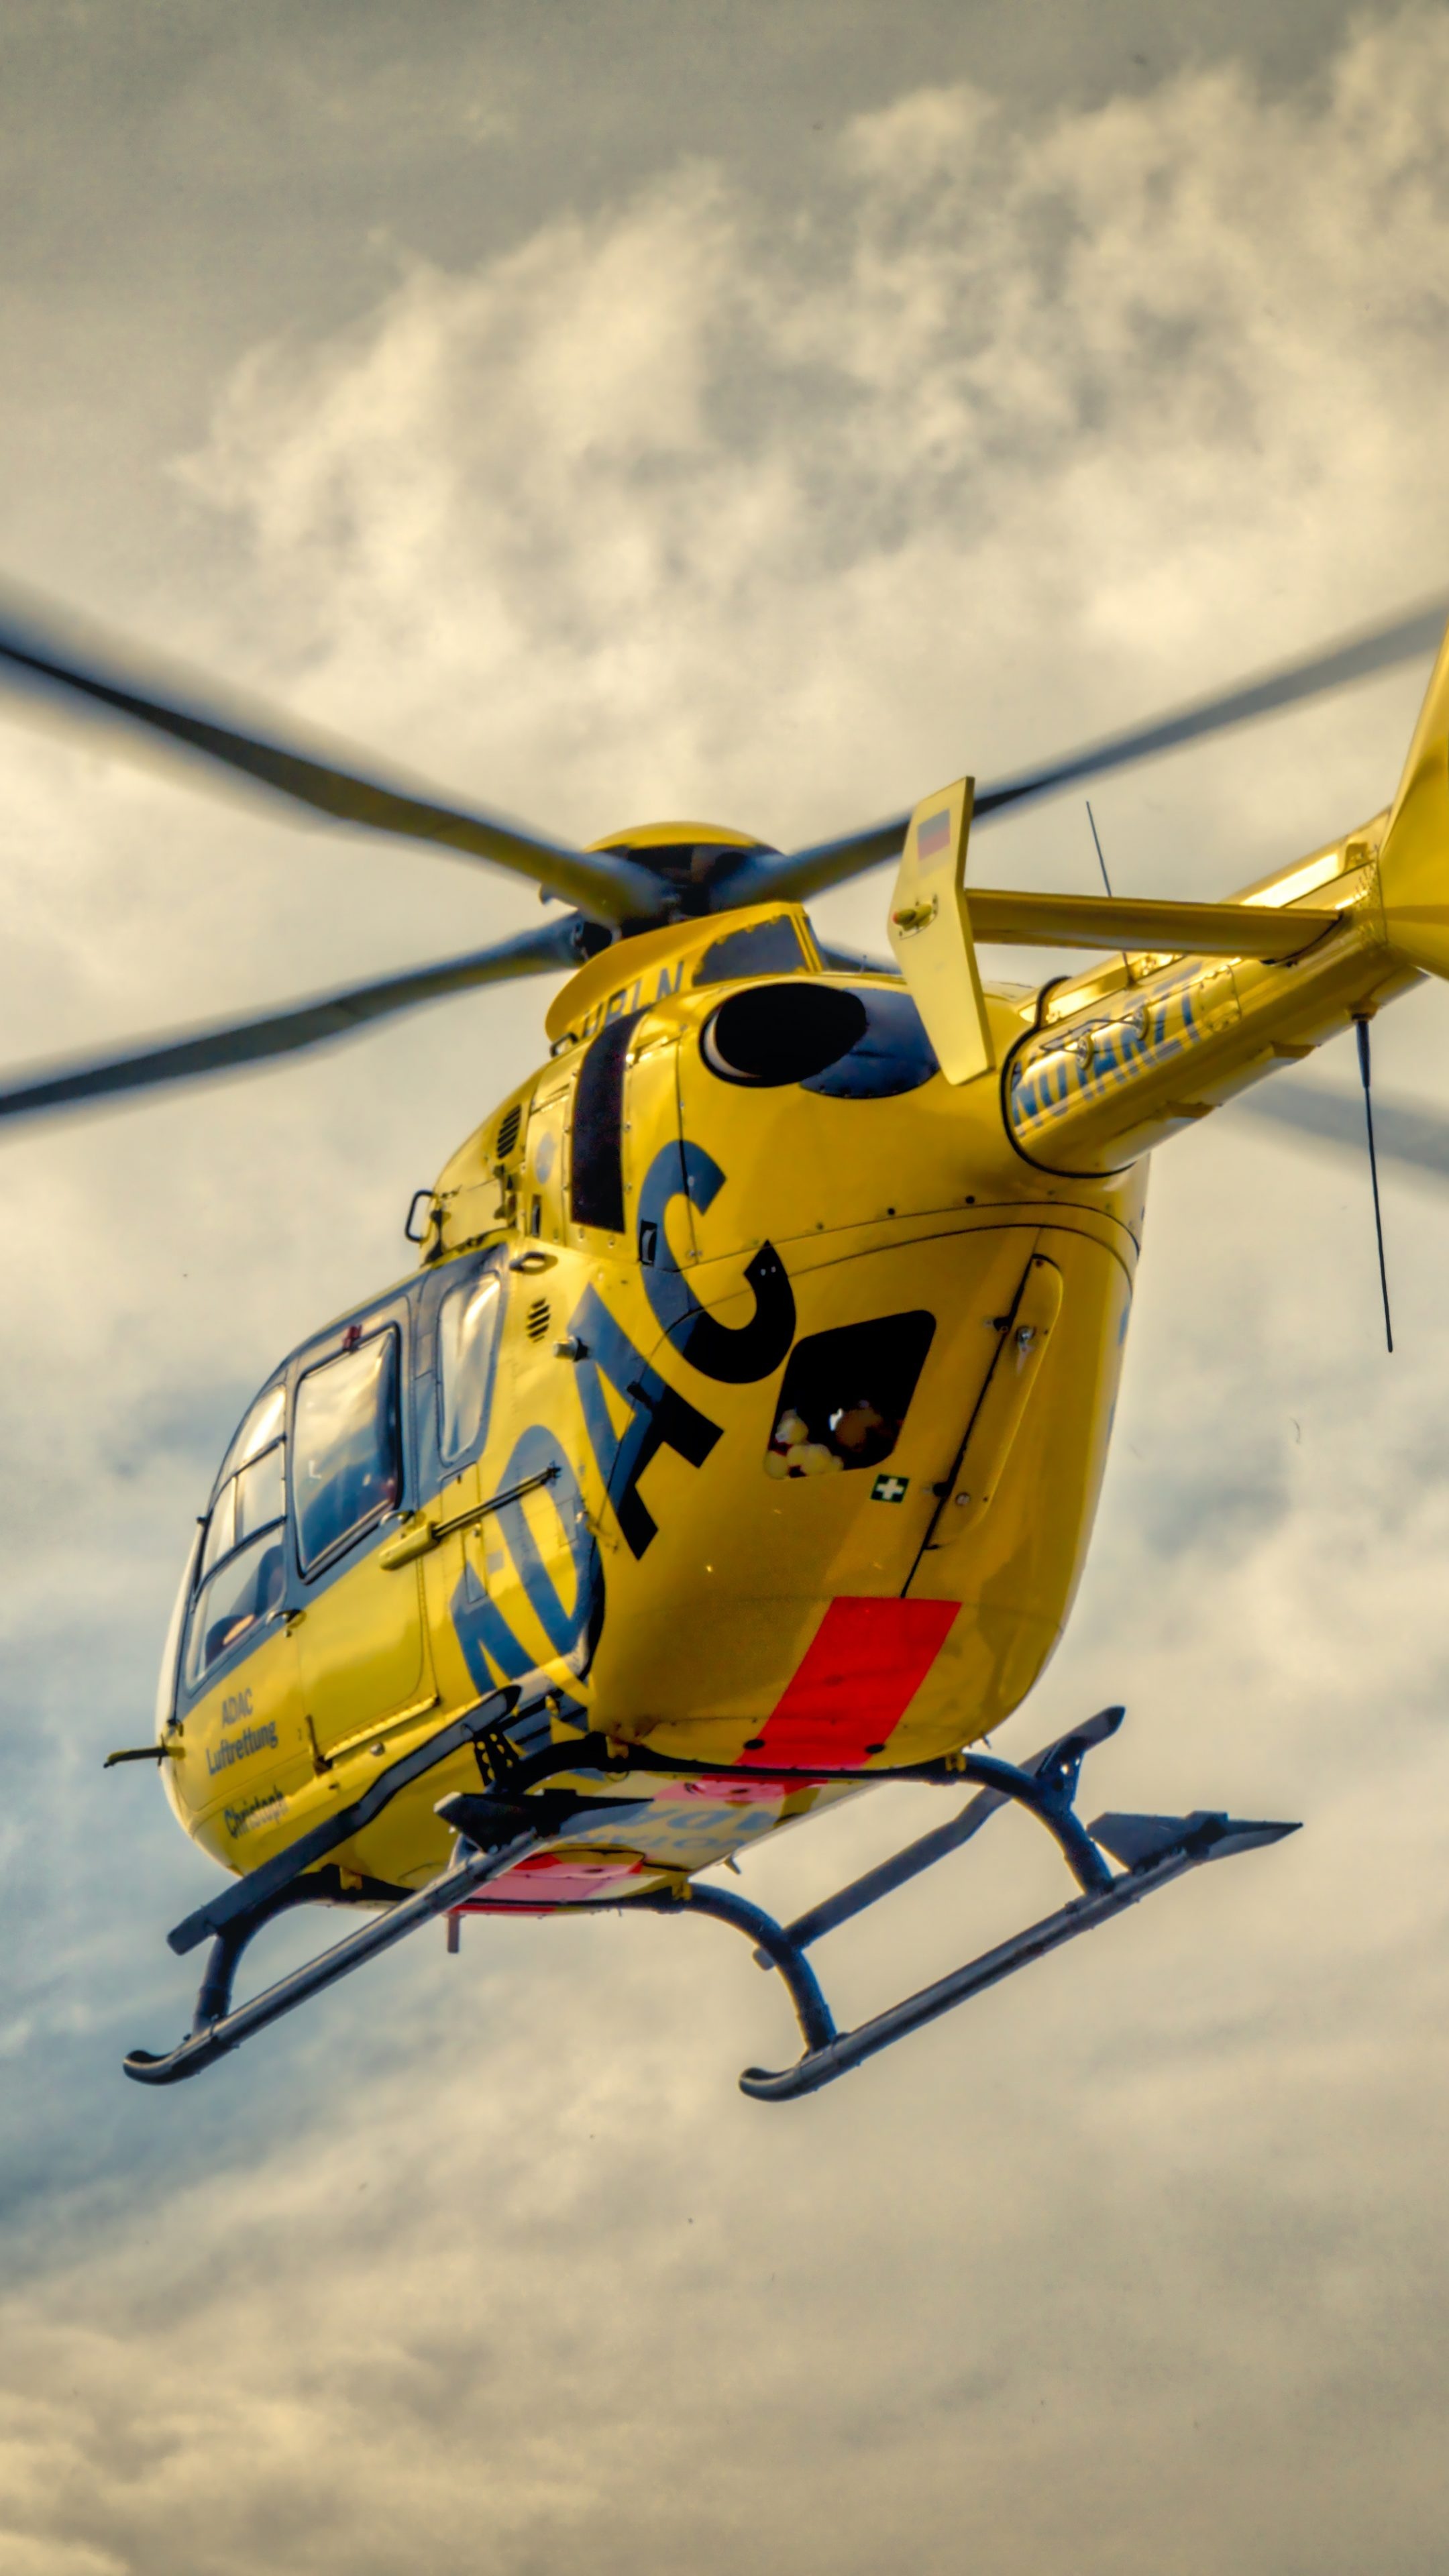 Adac rescue helicopter, Electrically powered rotor, Game-changing technology, Future innovation, 2160x3840 4K Phone